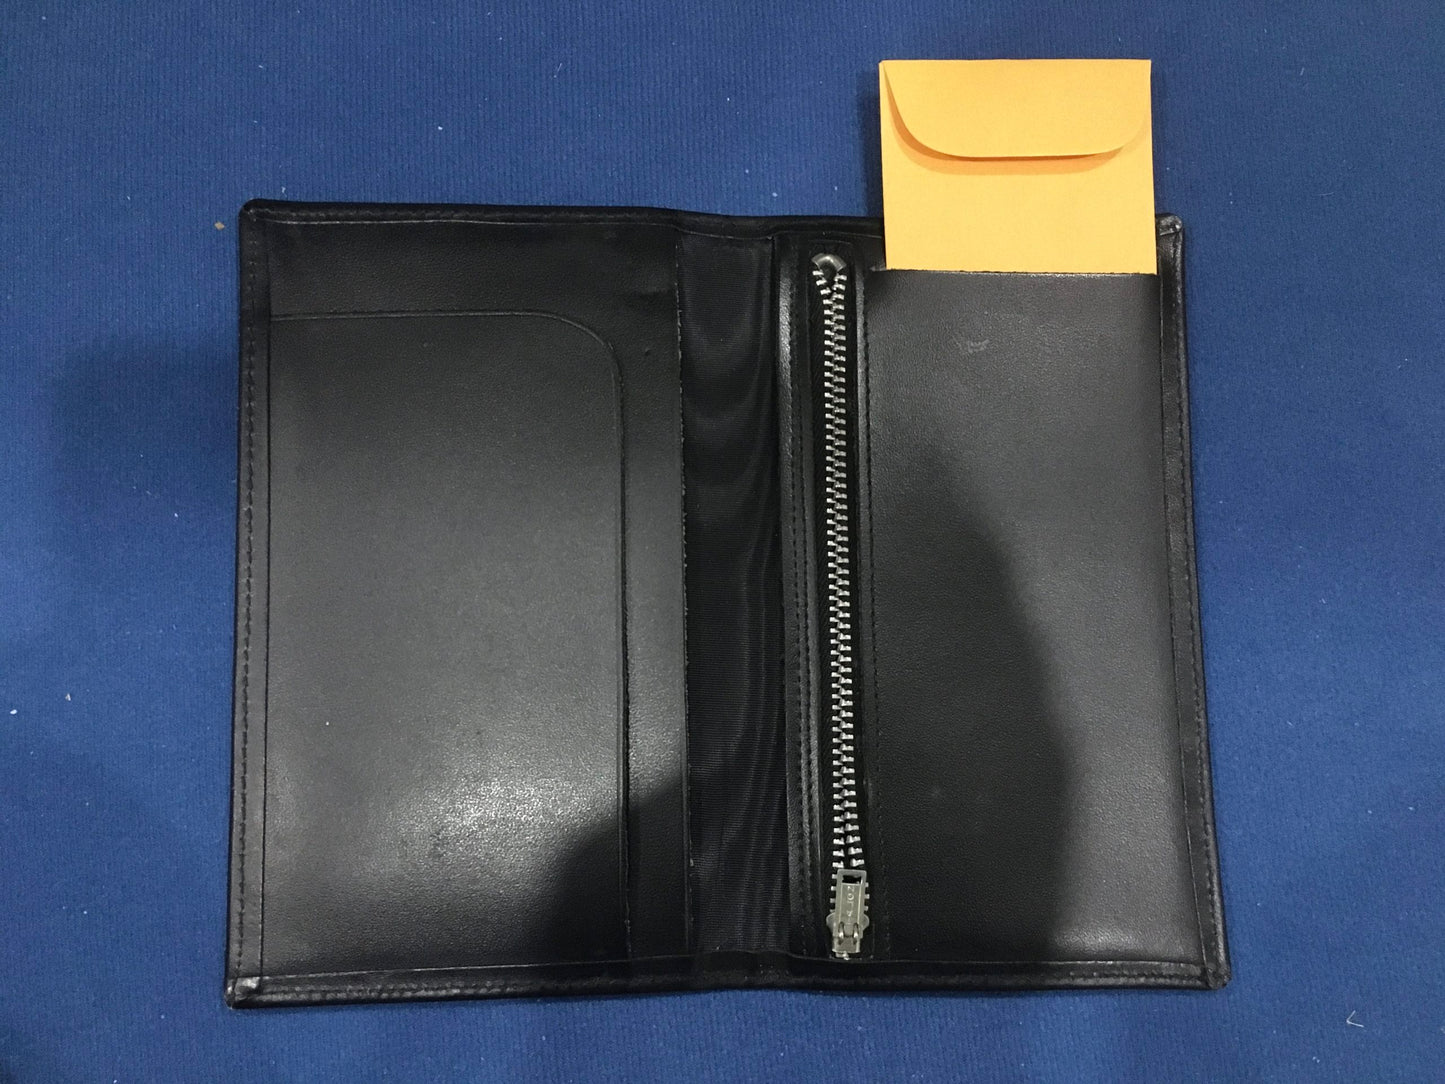 Magician's Wallet, used